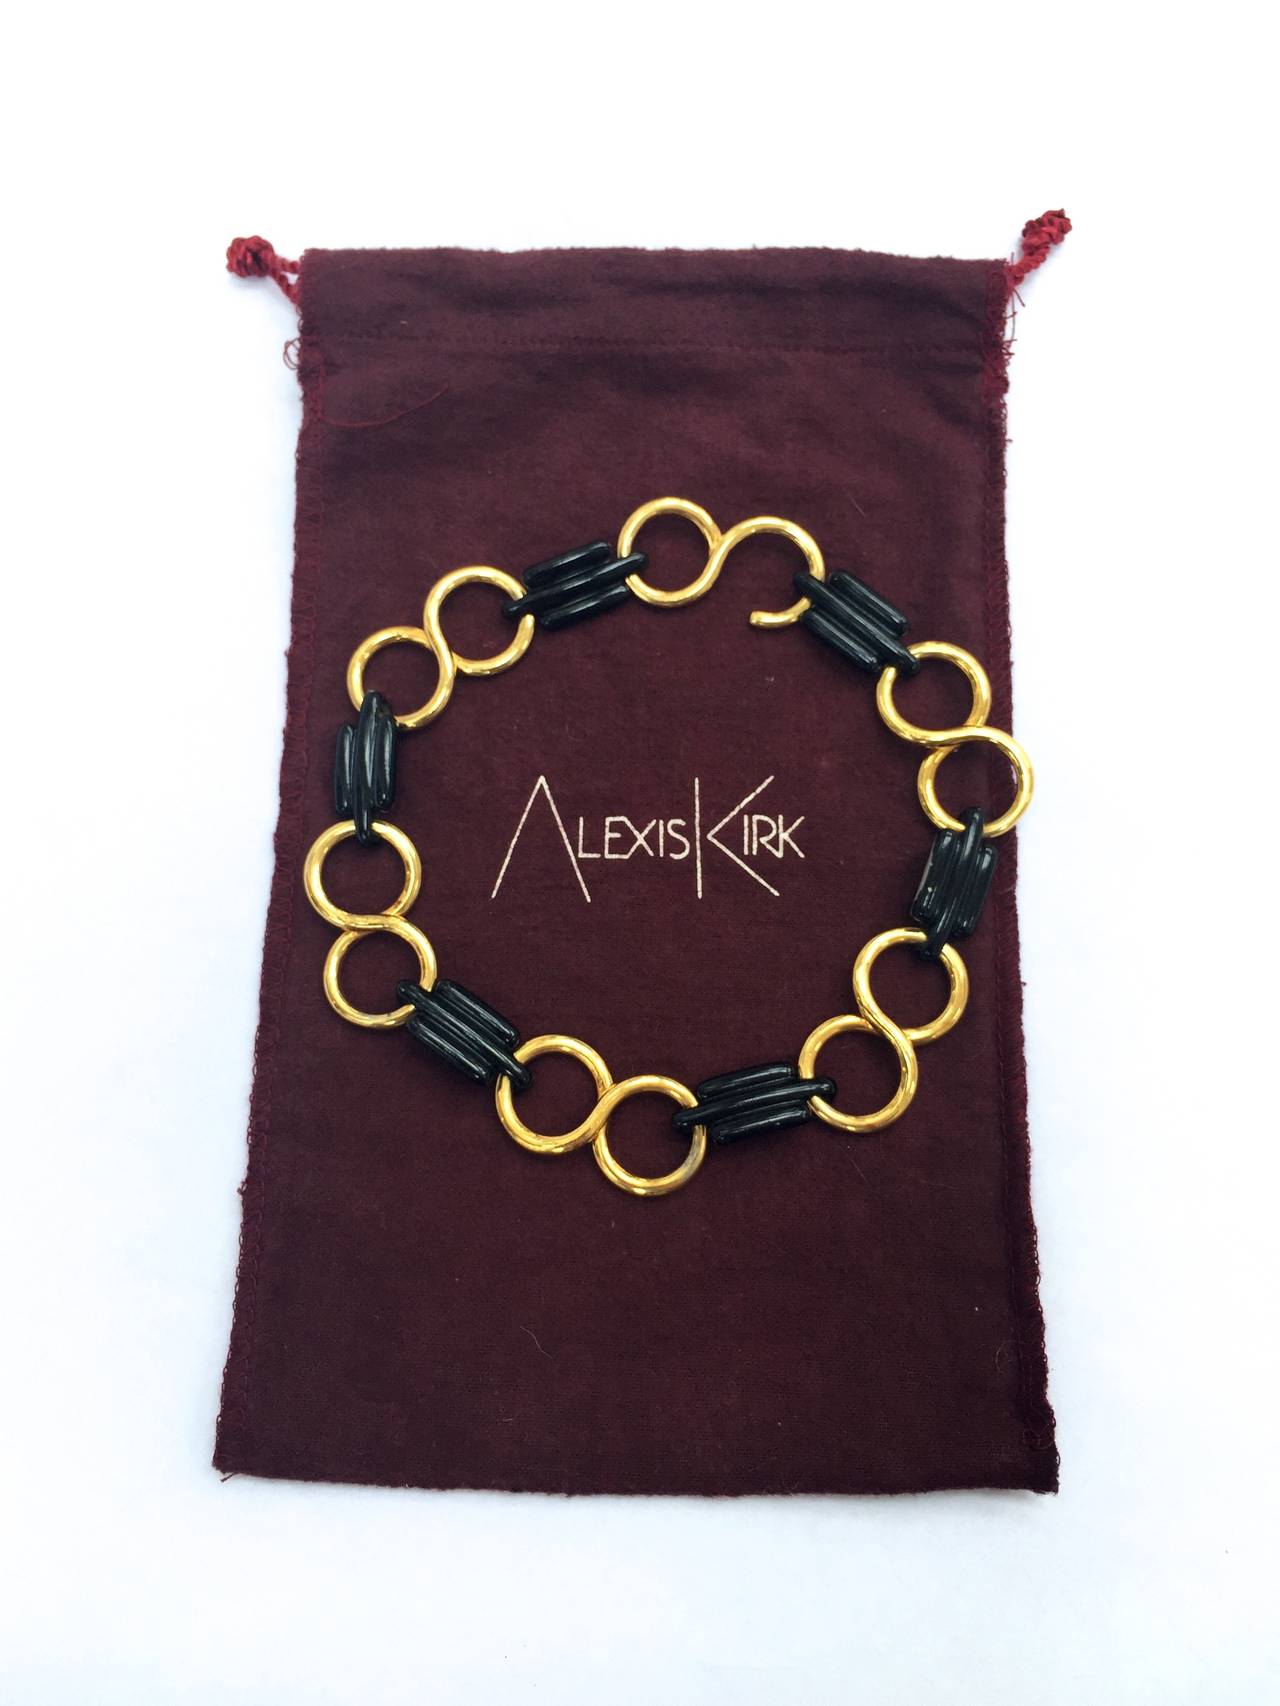 Alexis Kirk 1980s infinity brass links with black metal Art Deco links necklace. This necklace was given to my client by Ed Riley who worked for Alexis Kirk. Ed Riley worked for Alexis Kirk and then worked for Halston.
This gorgeous Alexis Kirk